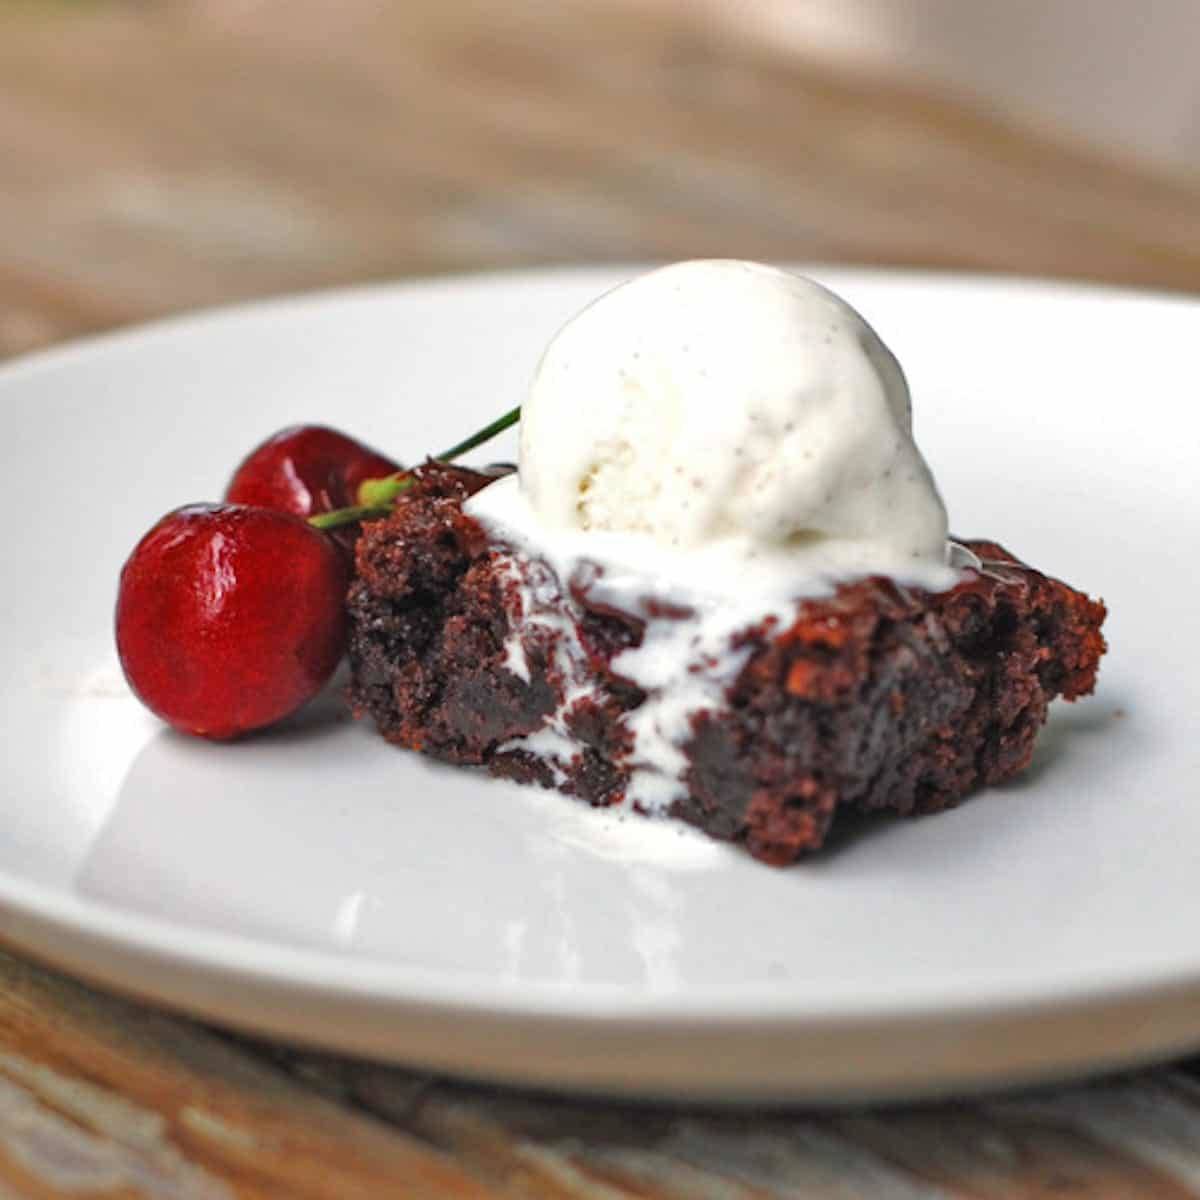 Roasted cherry brownie on a plate with ice cream.